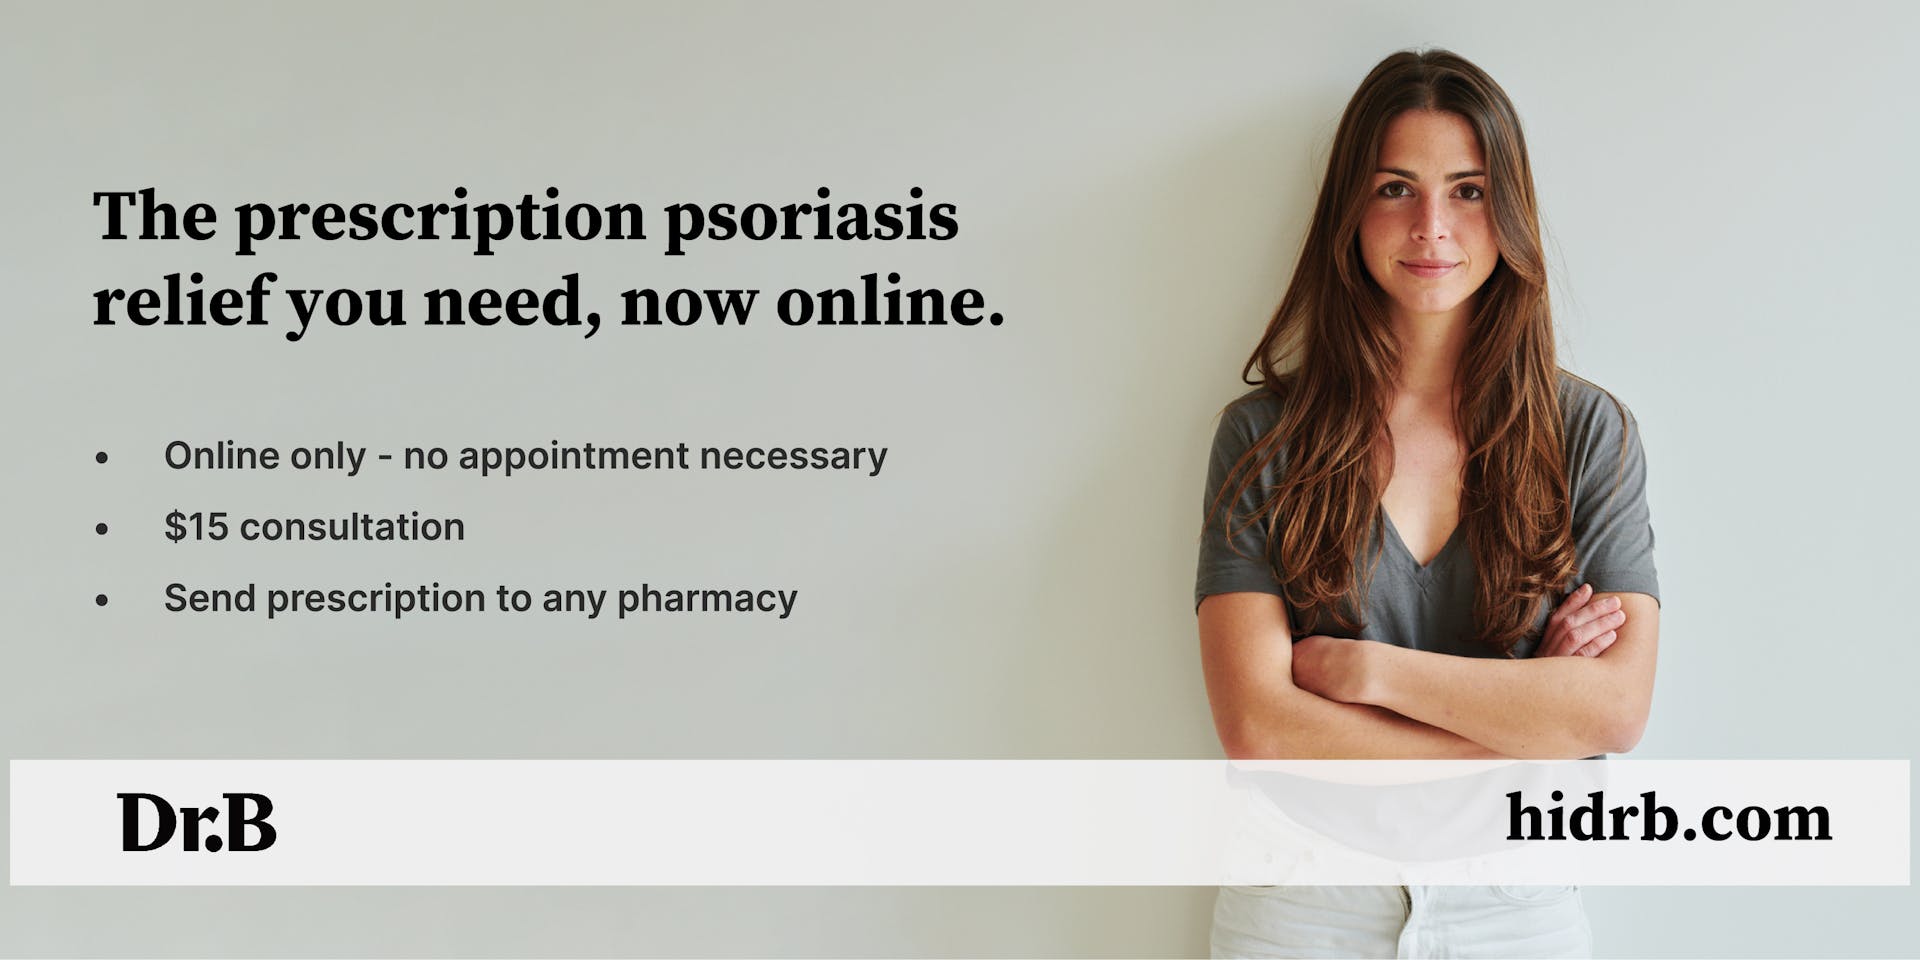 Banner advertising Dr. B's services for psoriasis treatments